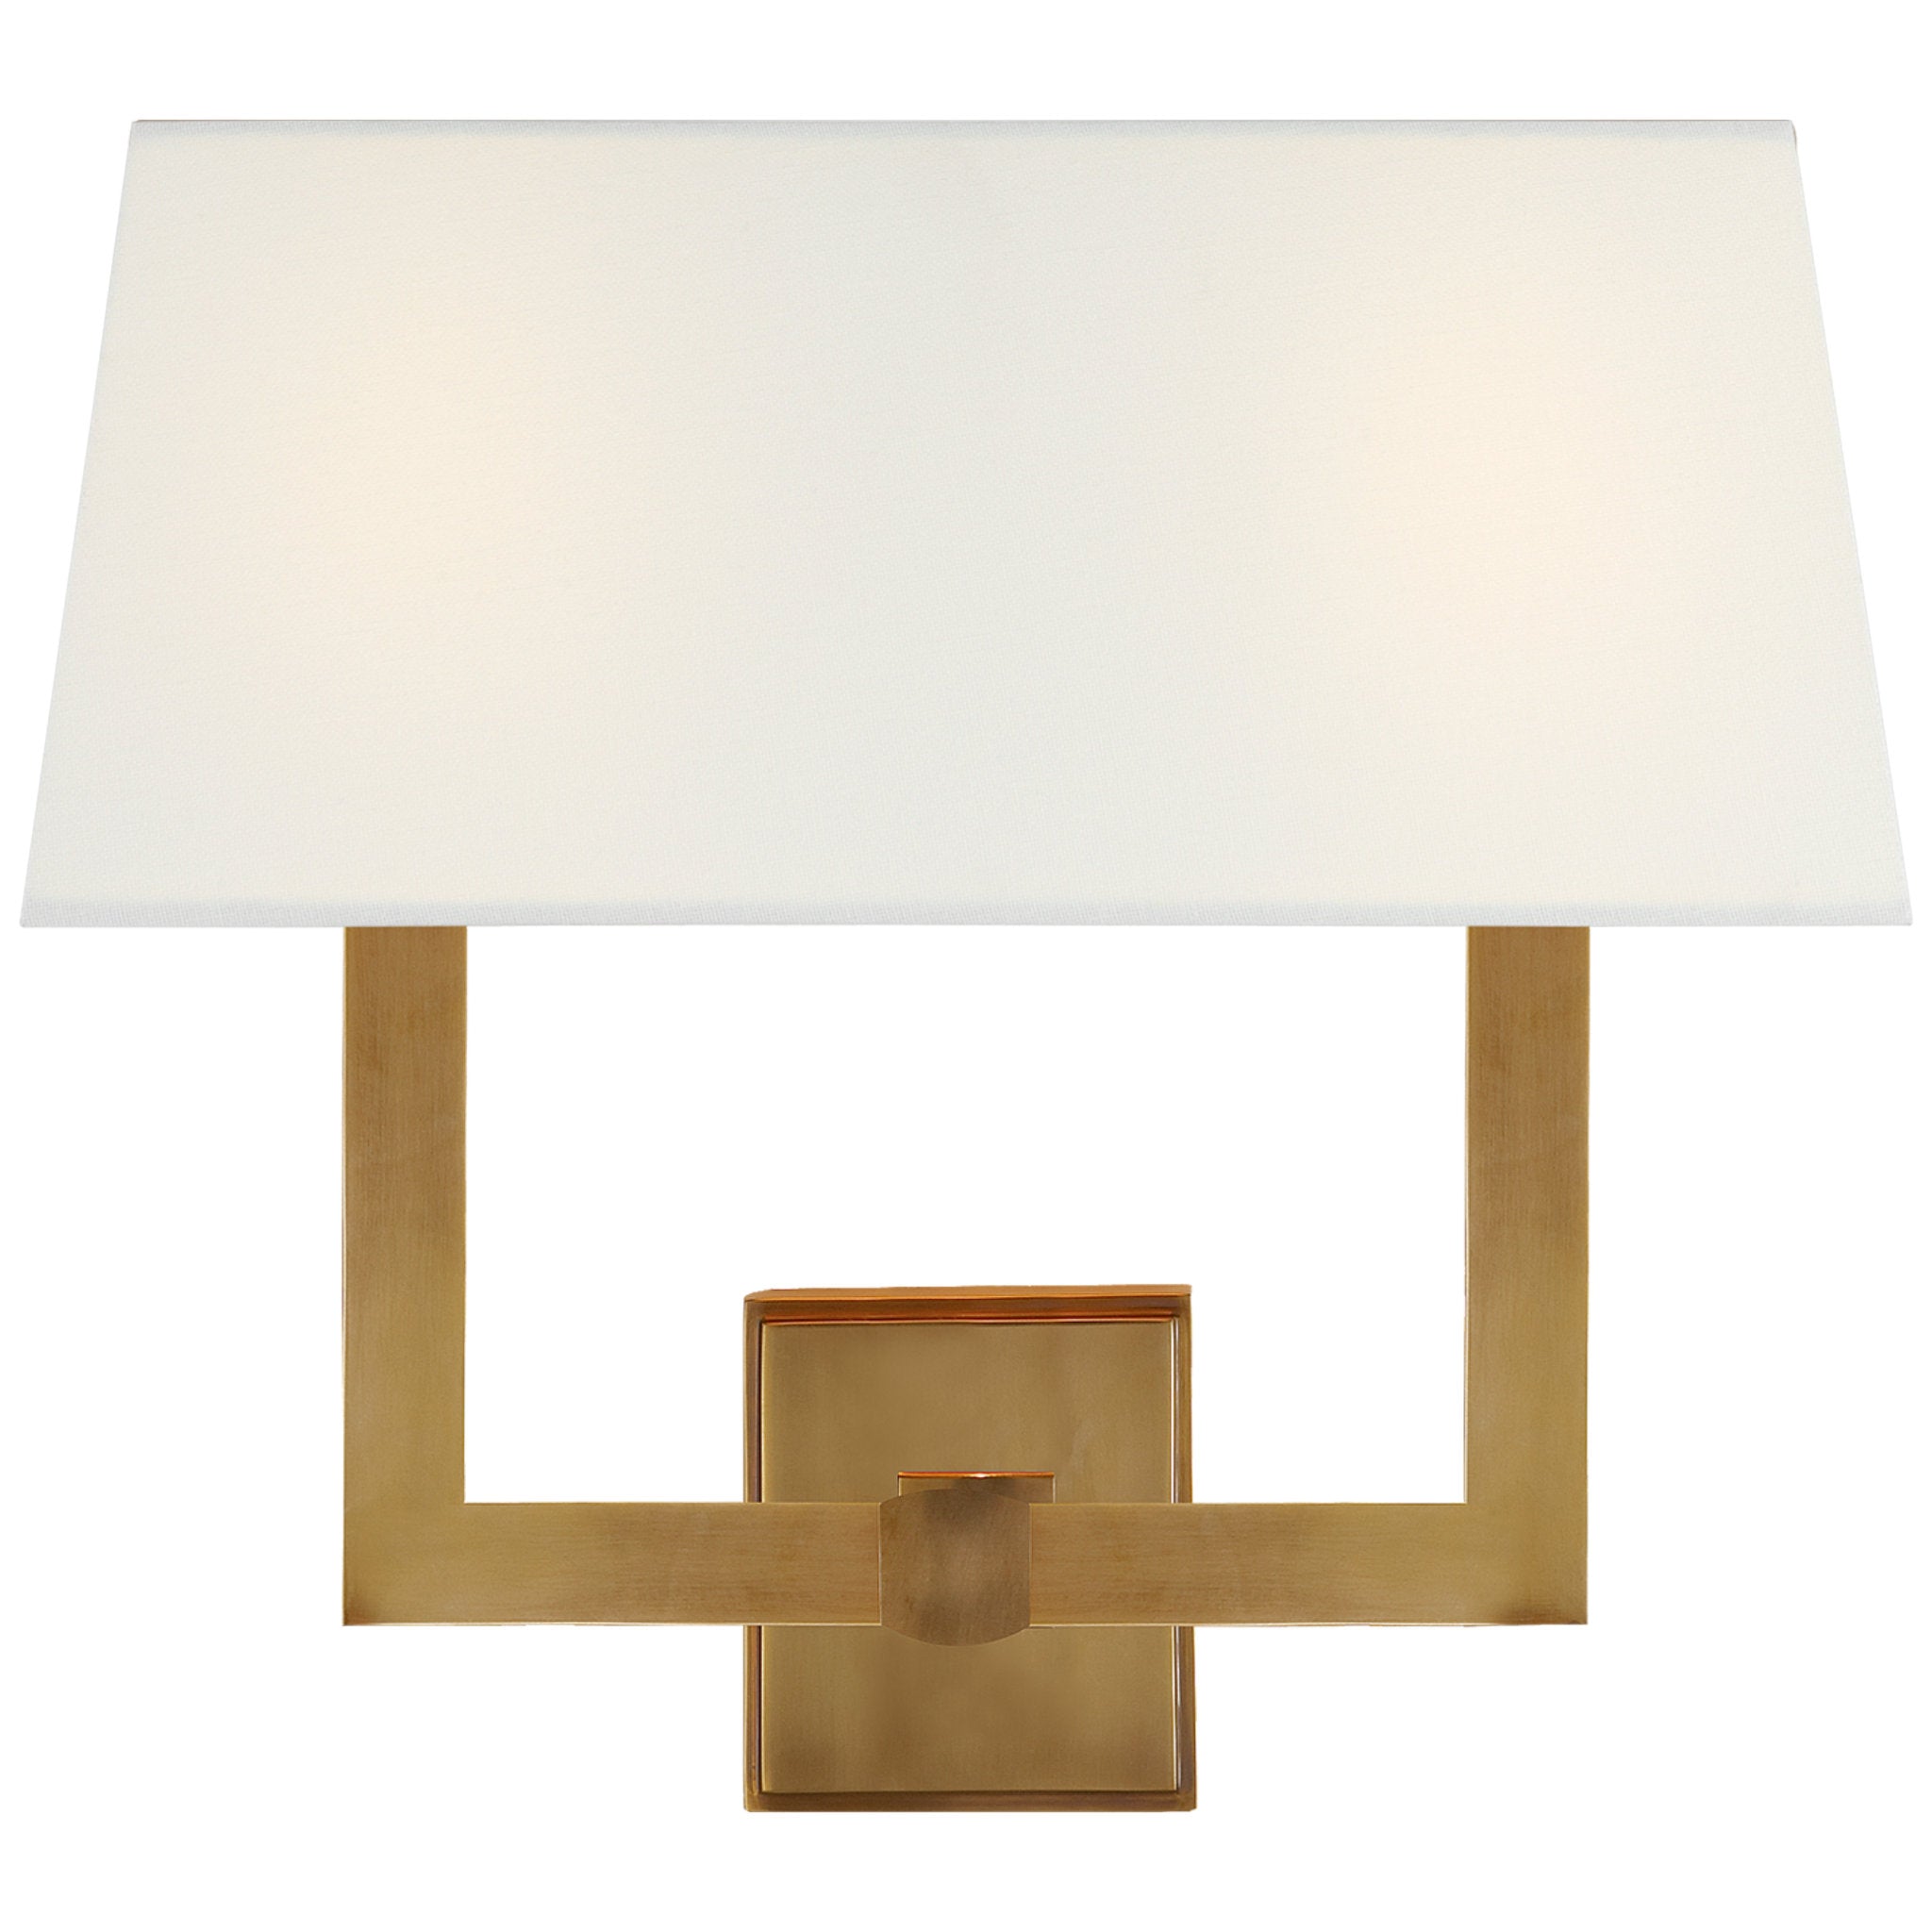 Chapman & Myers Square Tube Double Sconce in Hand-Rubbed Antique Brass with Linen Single Shade